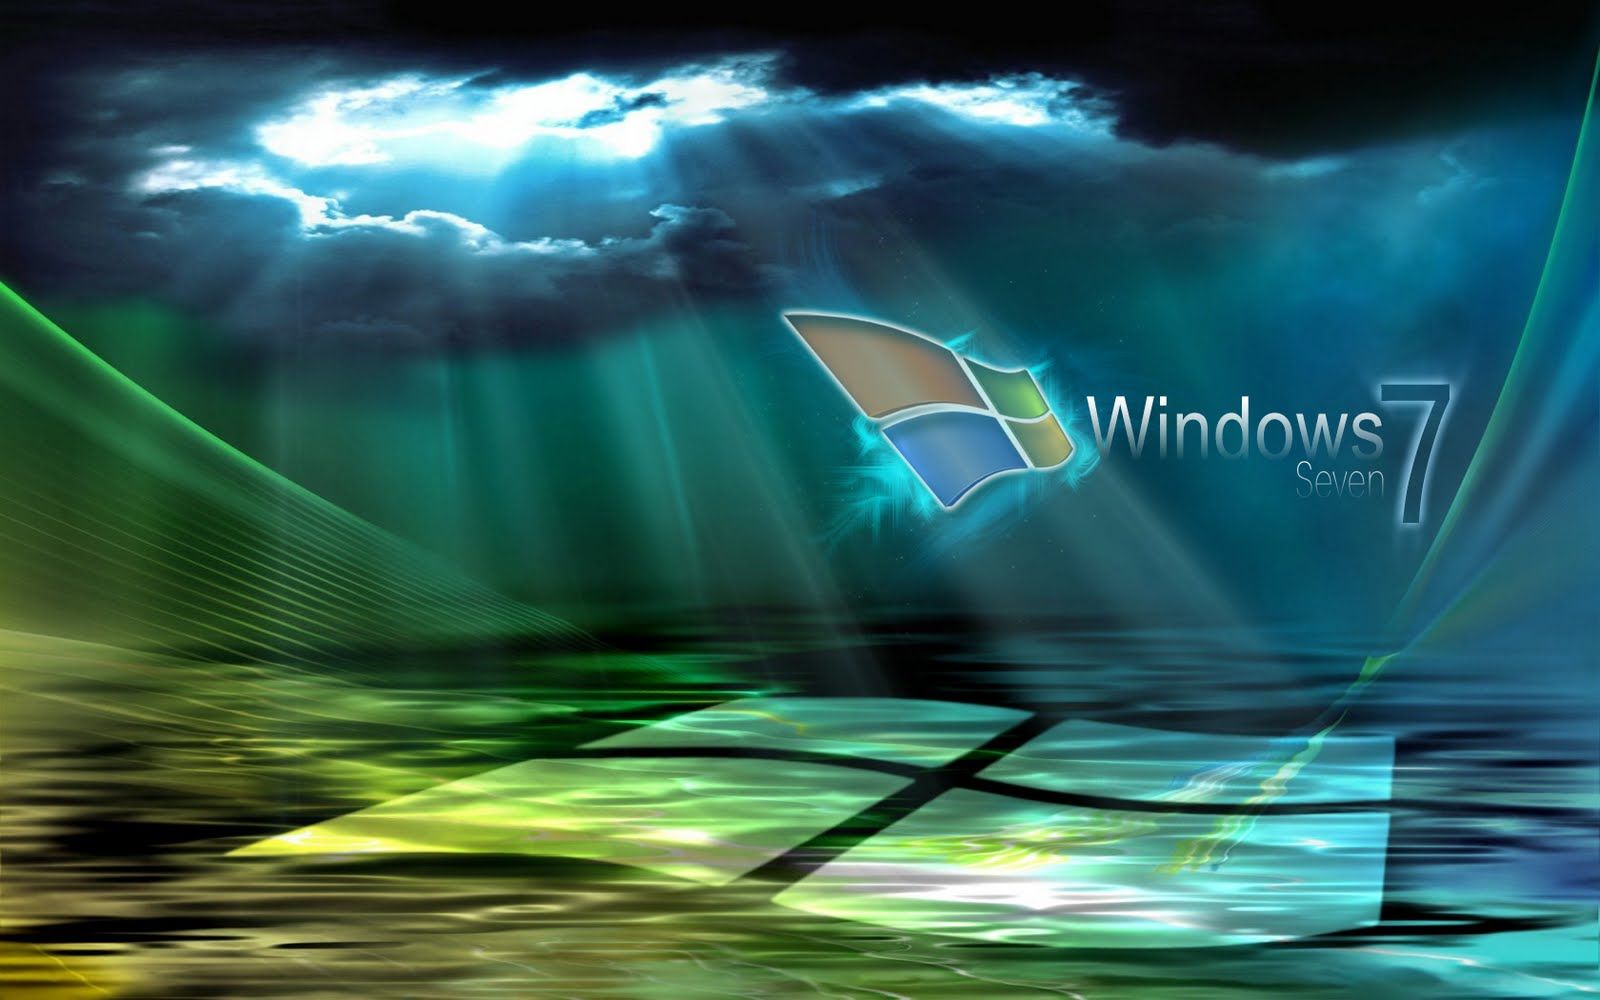 Windows 7 Backgrounds Free - Wallpaper Cave